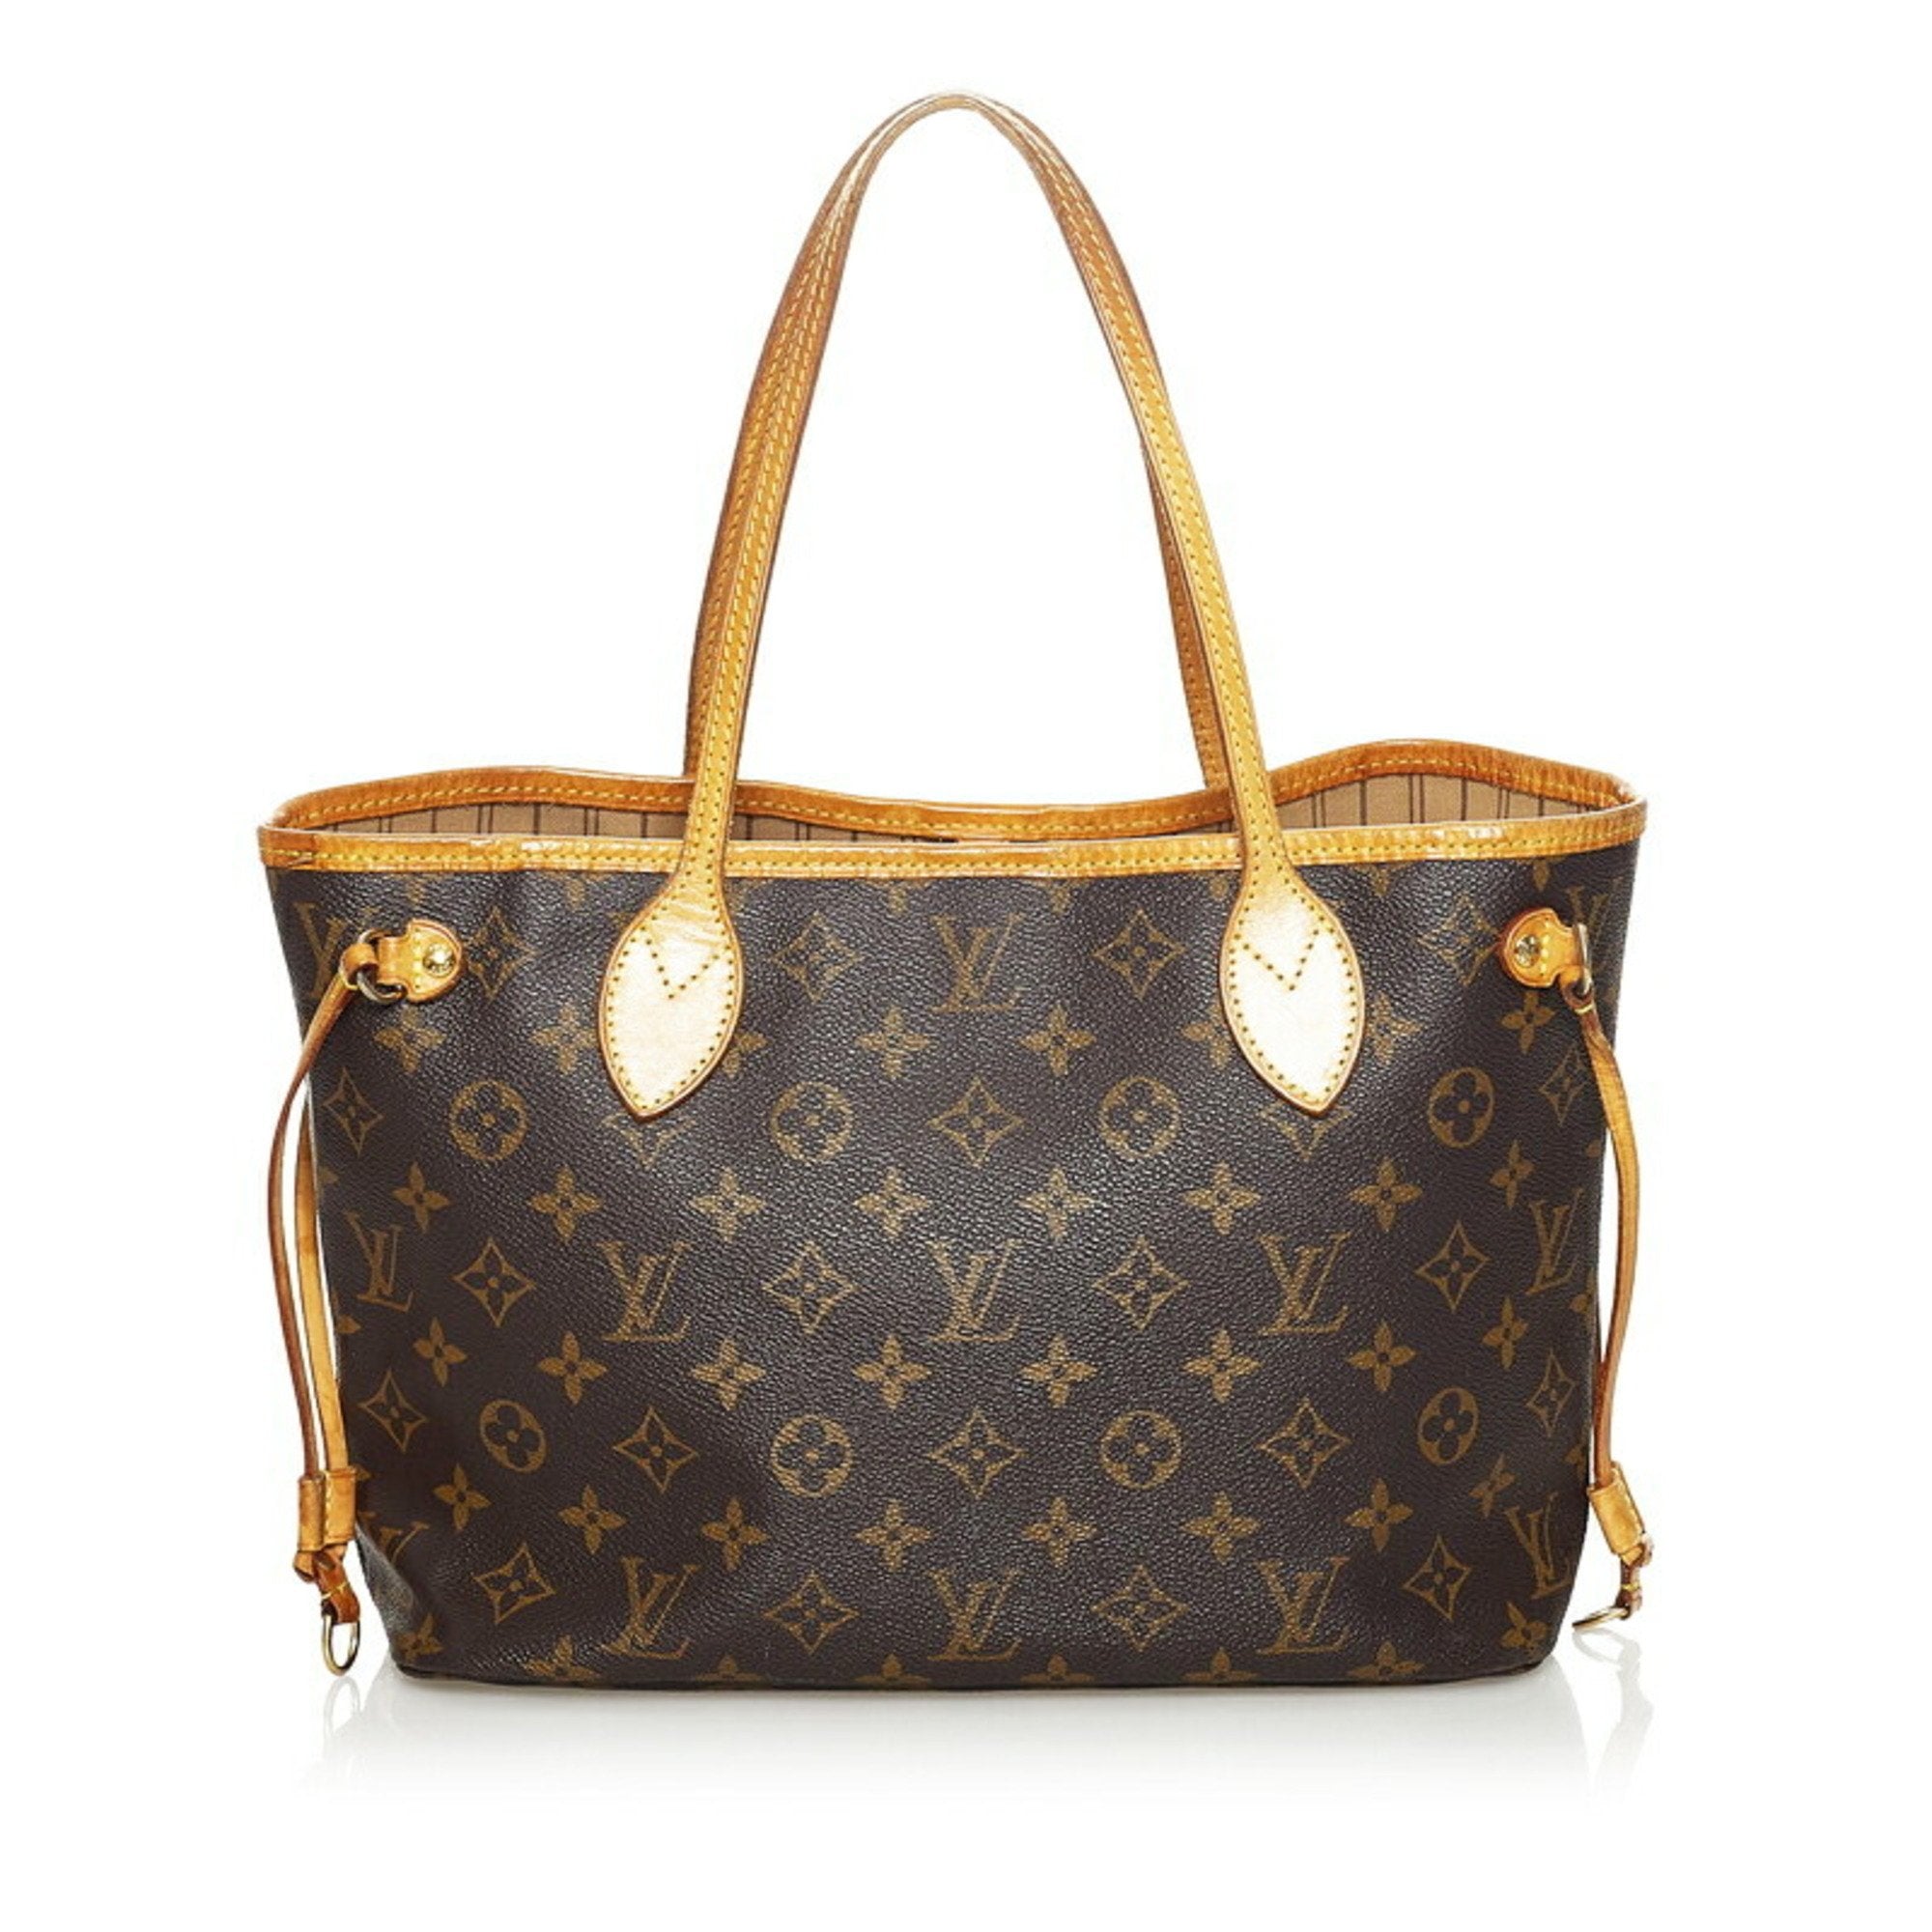 Louis Vuitton Neverfull PM Tote